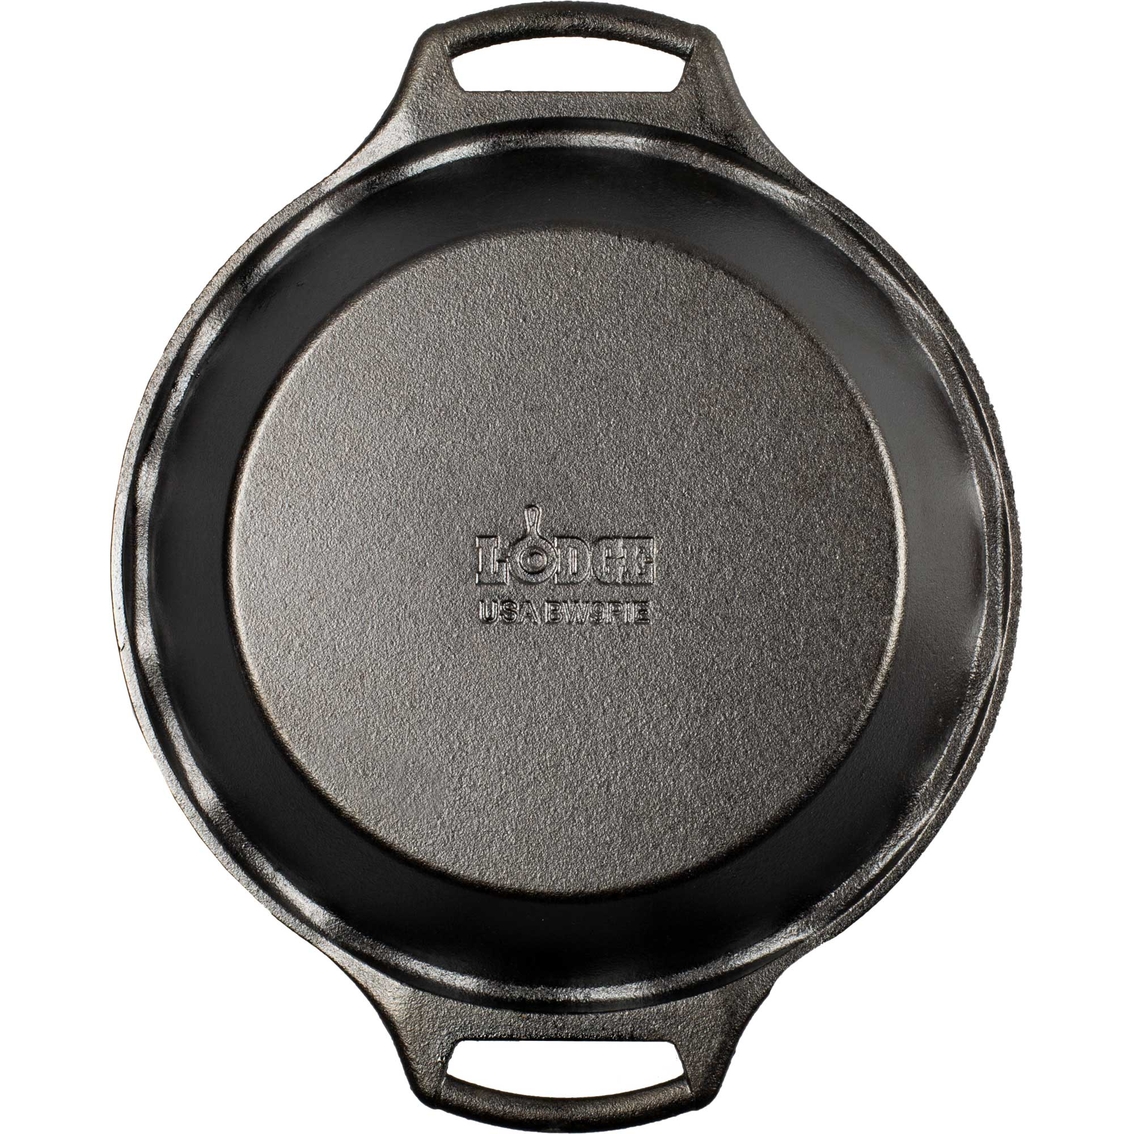 Lodge Cast Iron 9.5 in. Pie Pan - Image 4 of 7